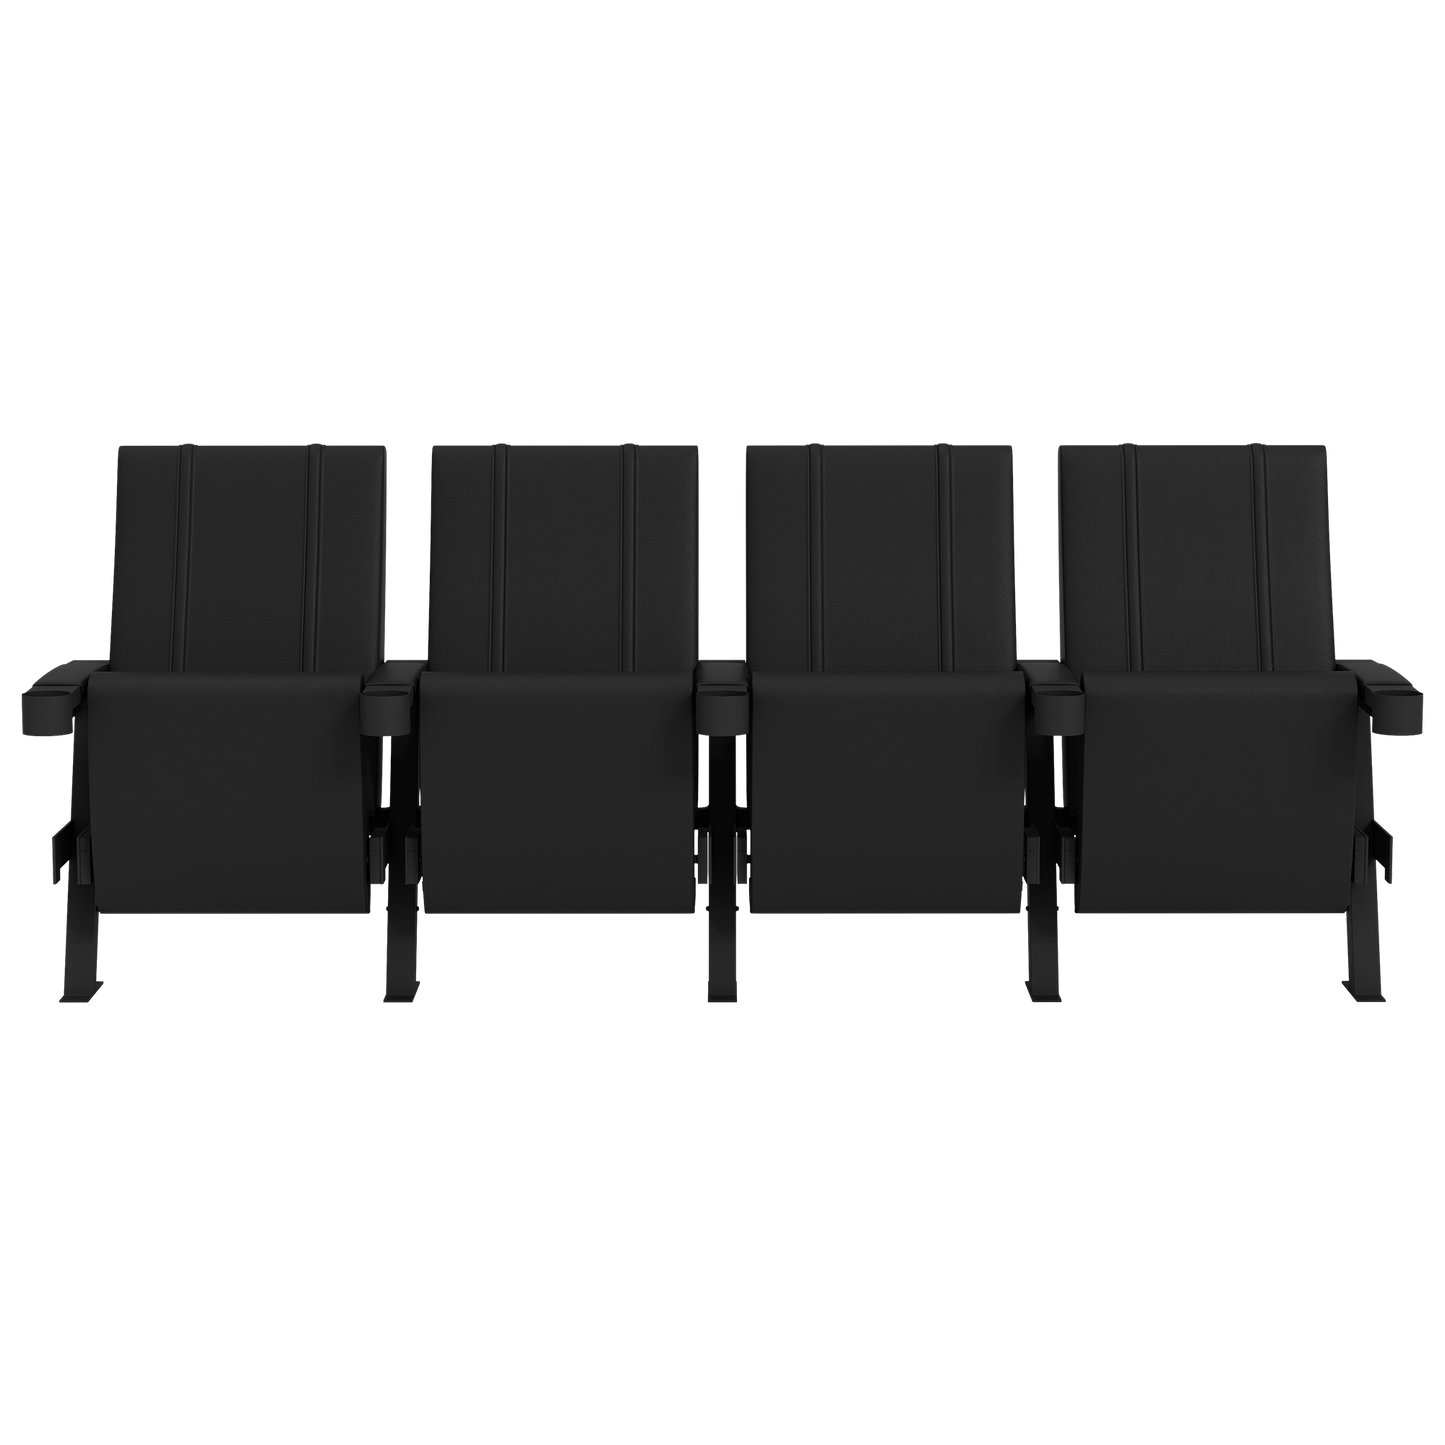 SuiteMax 3.5 VIP Seats with New York City FC Primary Logo